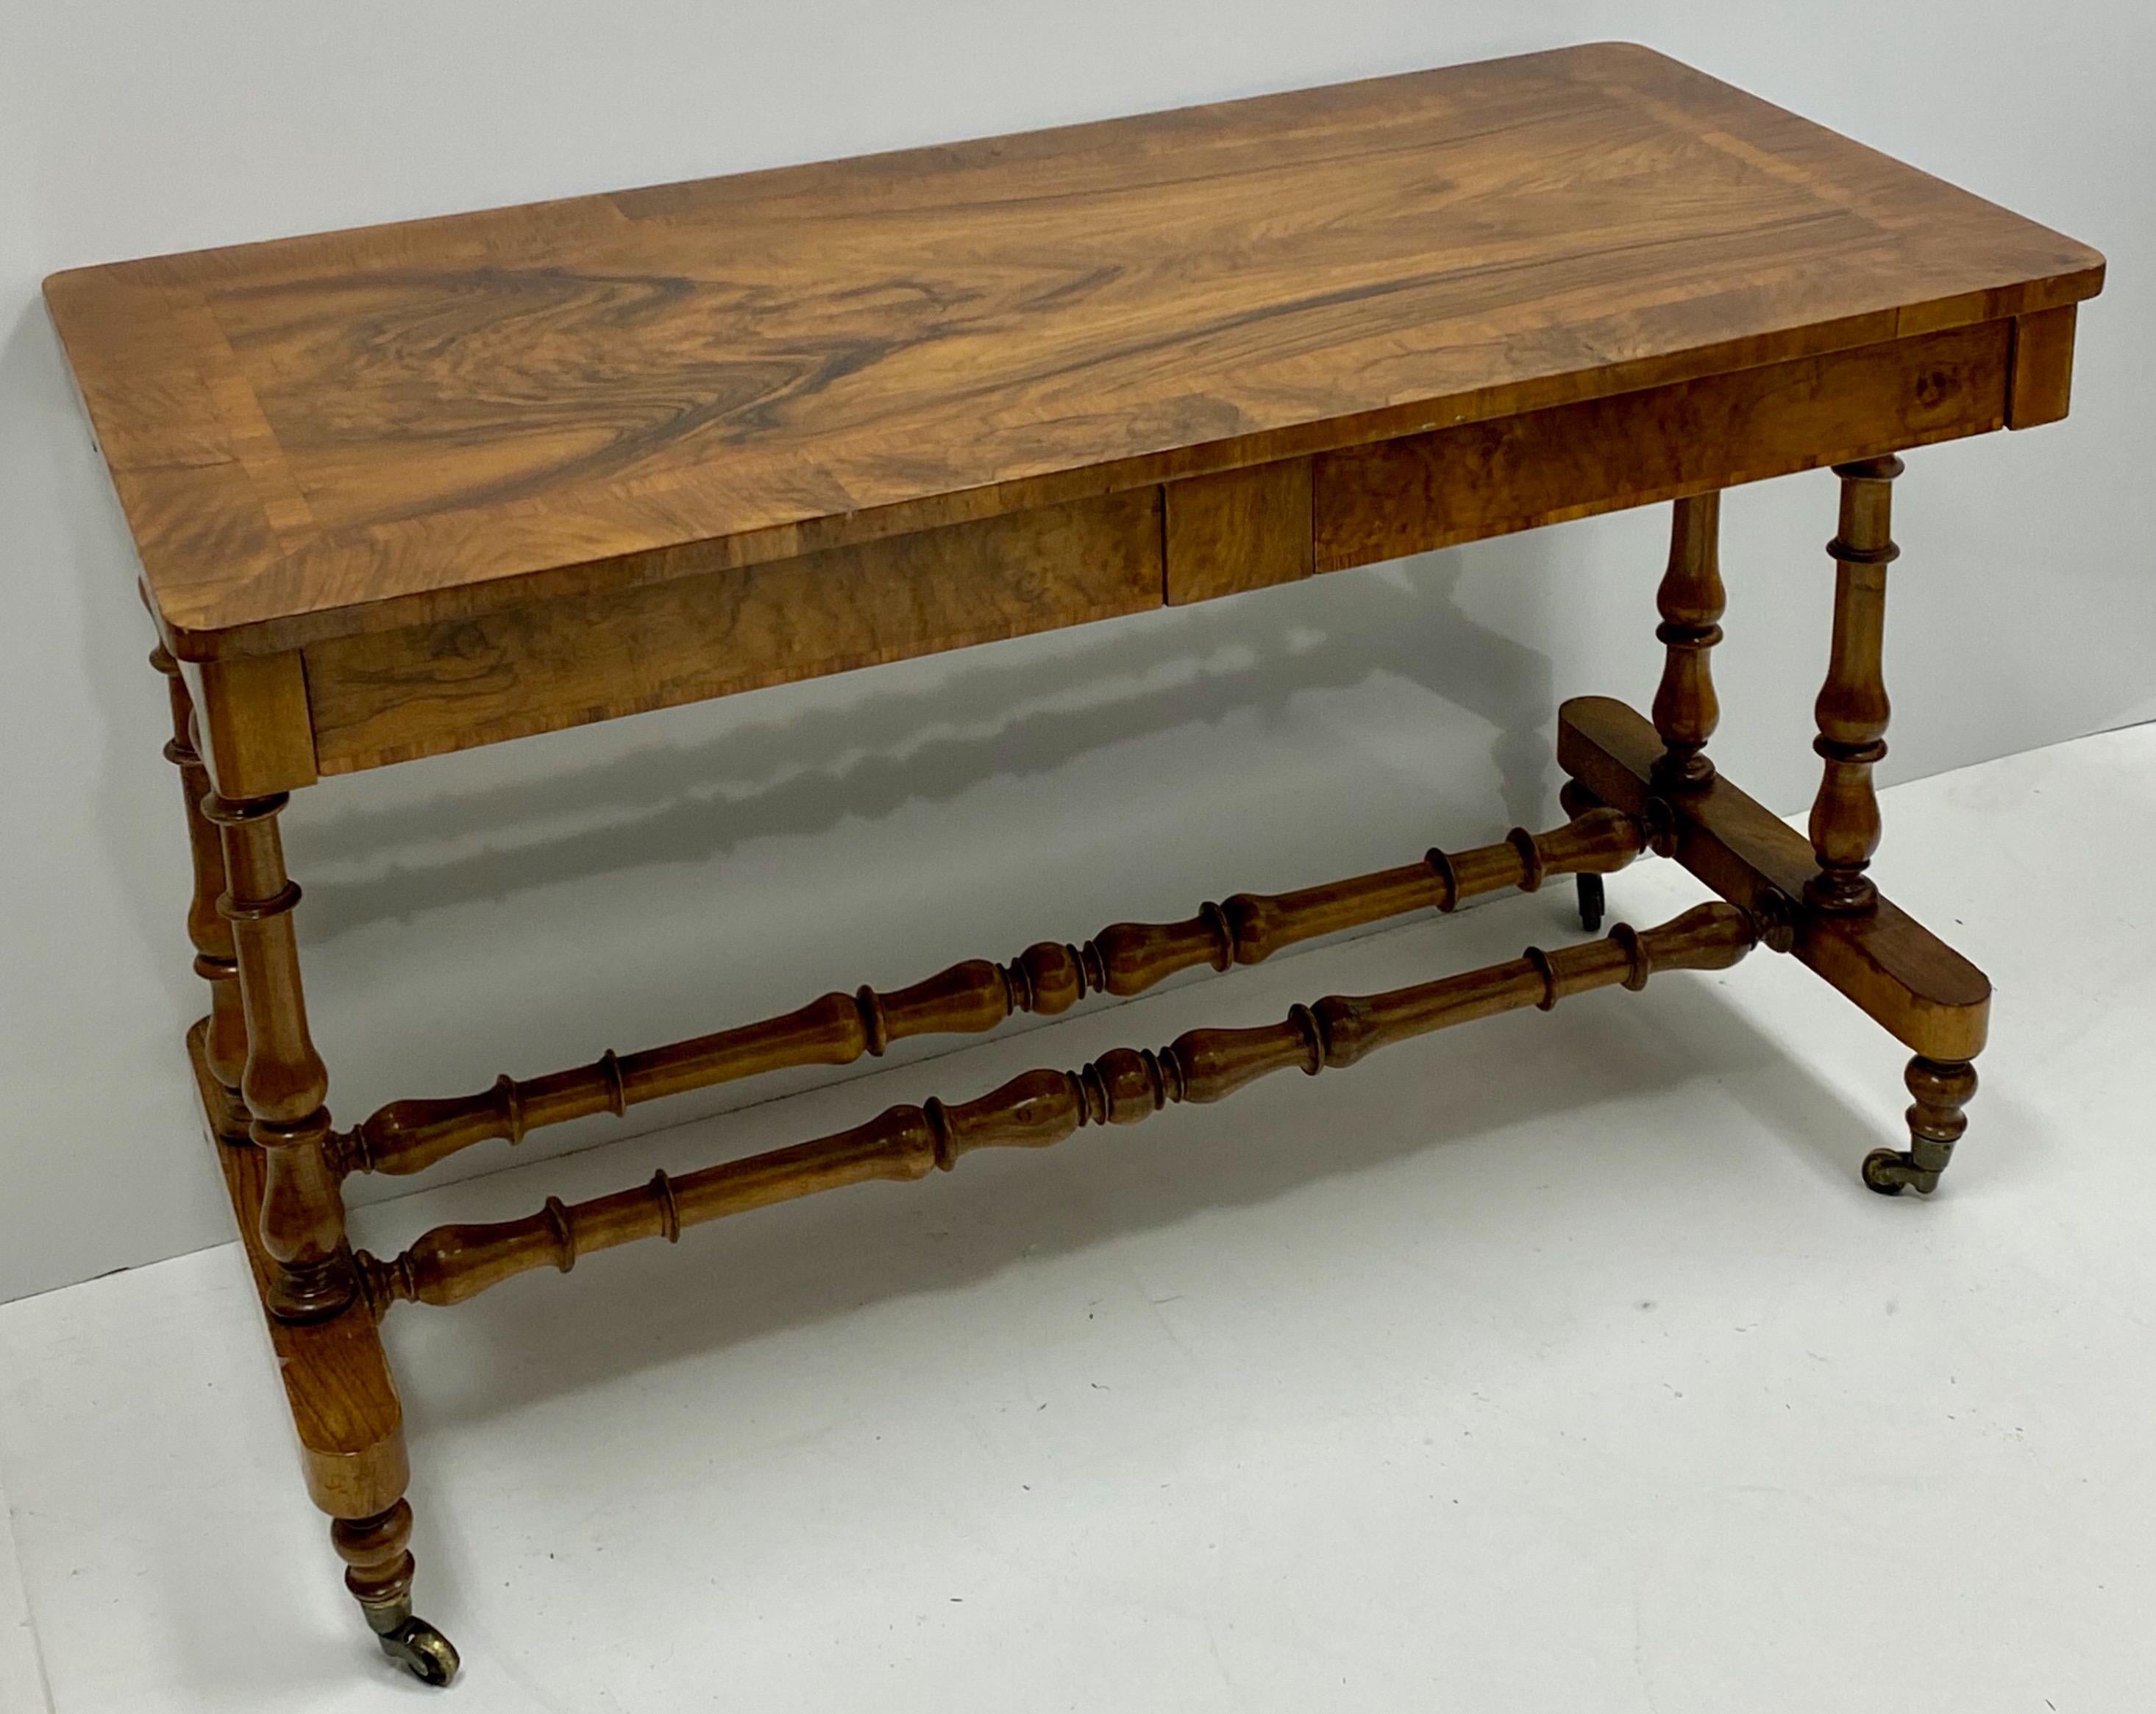 This is a late 19th century English carved walnut turned leg writing desk or console table. It is in very good condition, and the drawers do have dovetail construction. It is unmarked.